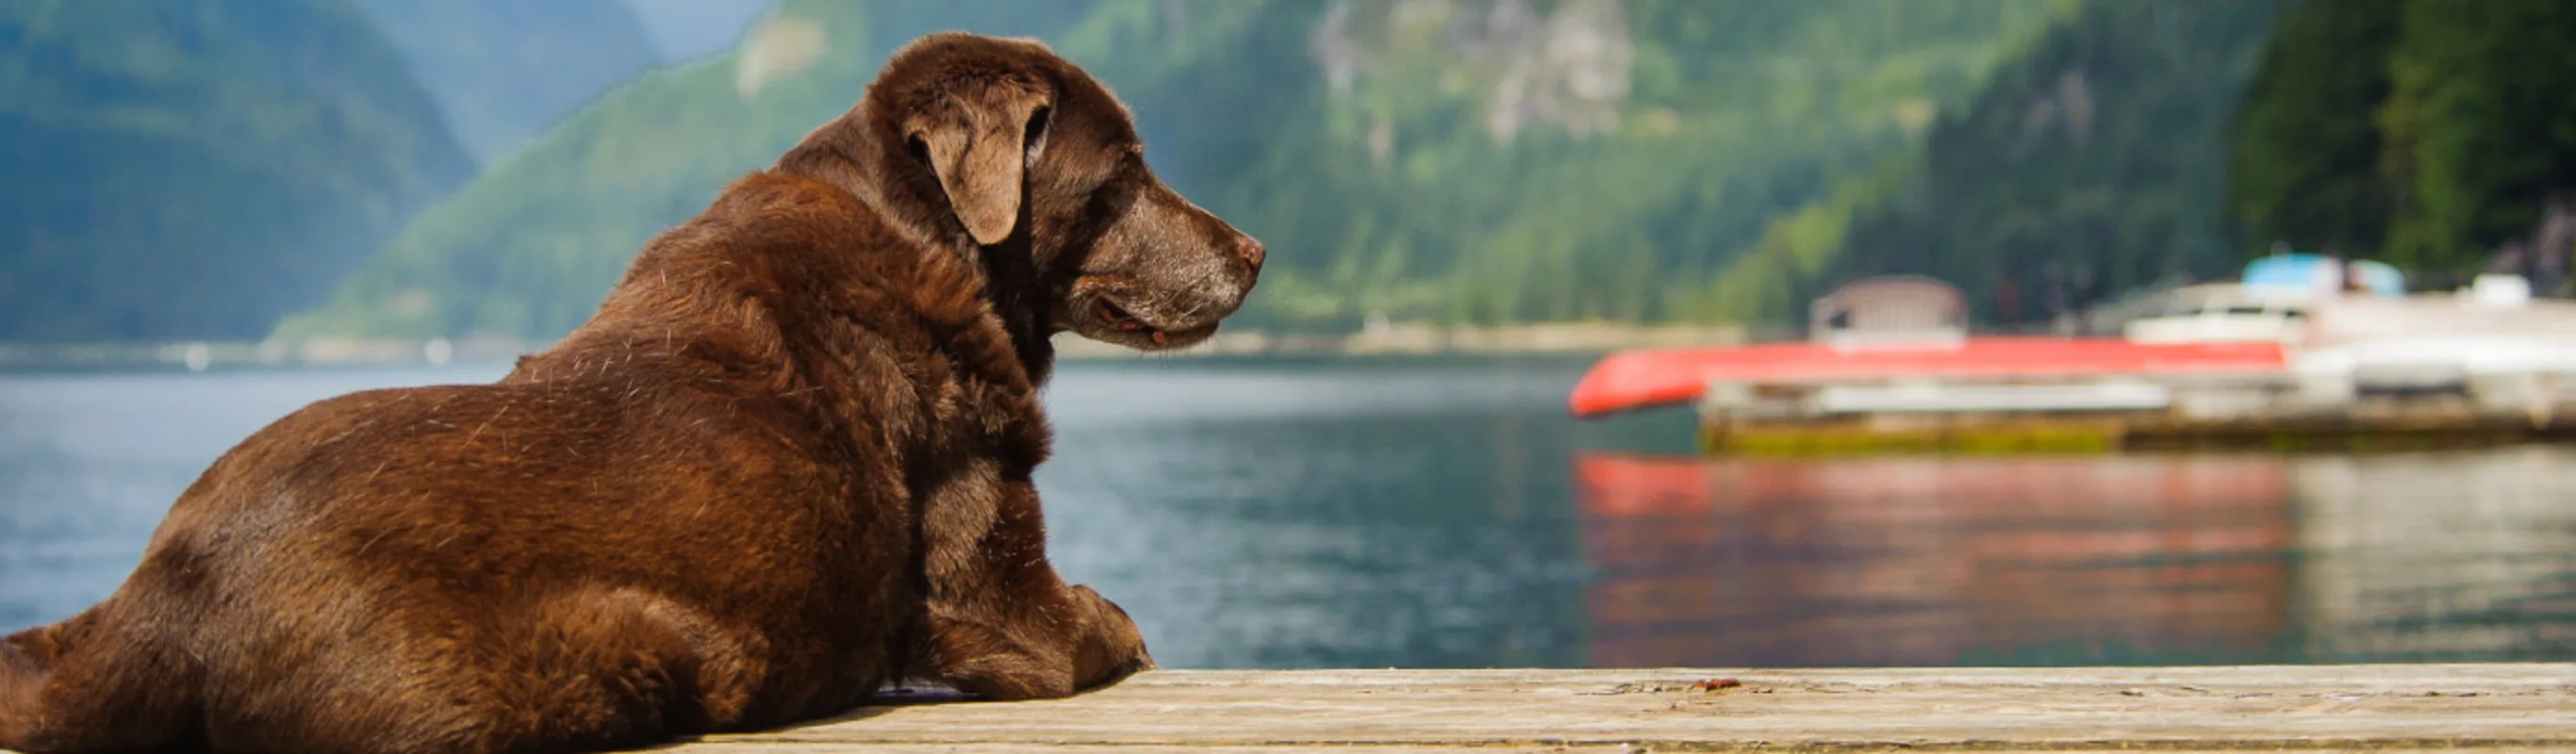 Brown lab sitting on dock overlooking water and mountain scene